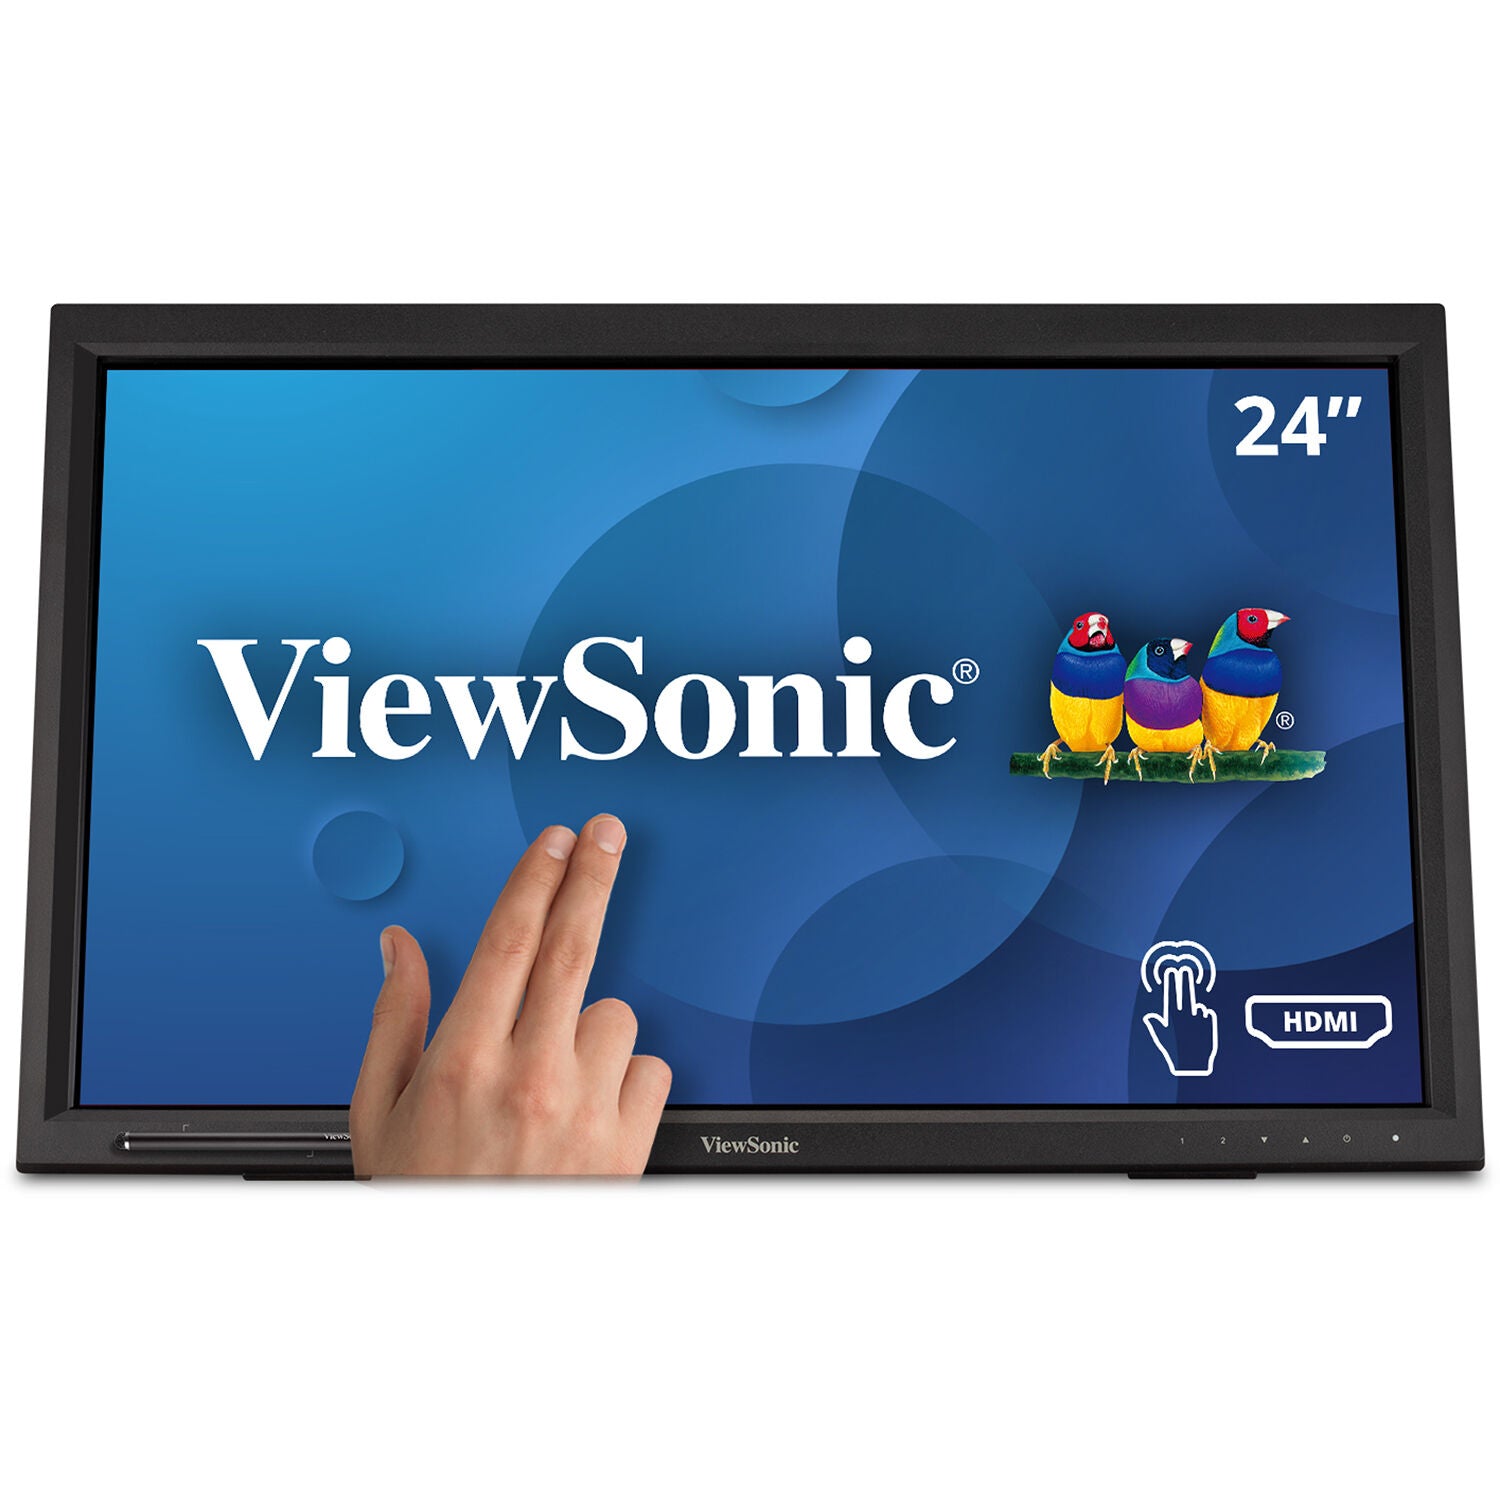 ViewSonic TD2423D-S 24" 16:9 Multi-Touch LCD Monitor - Certified Refurbished